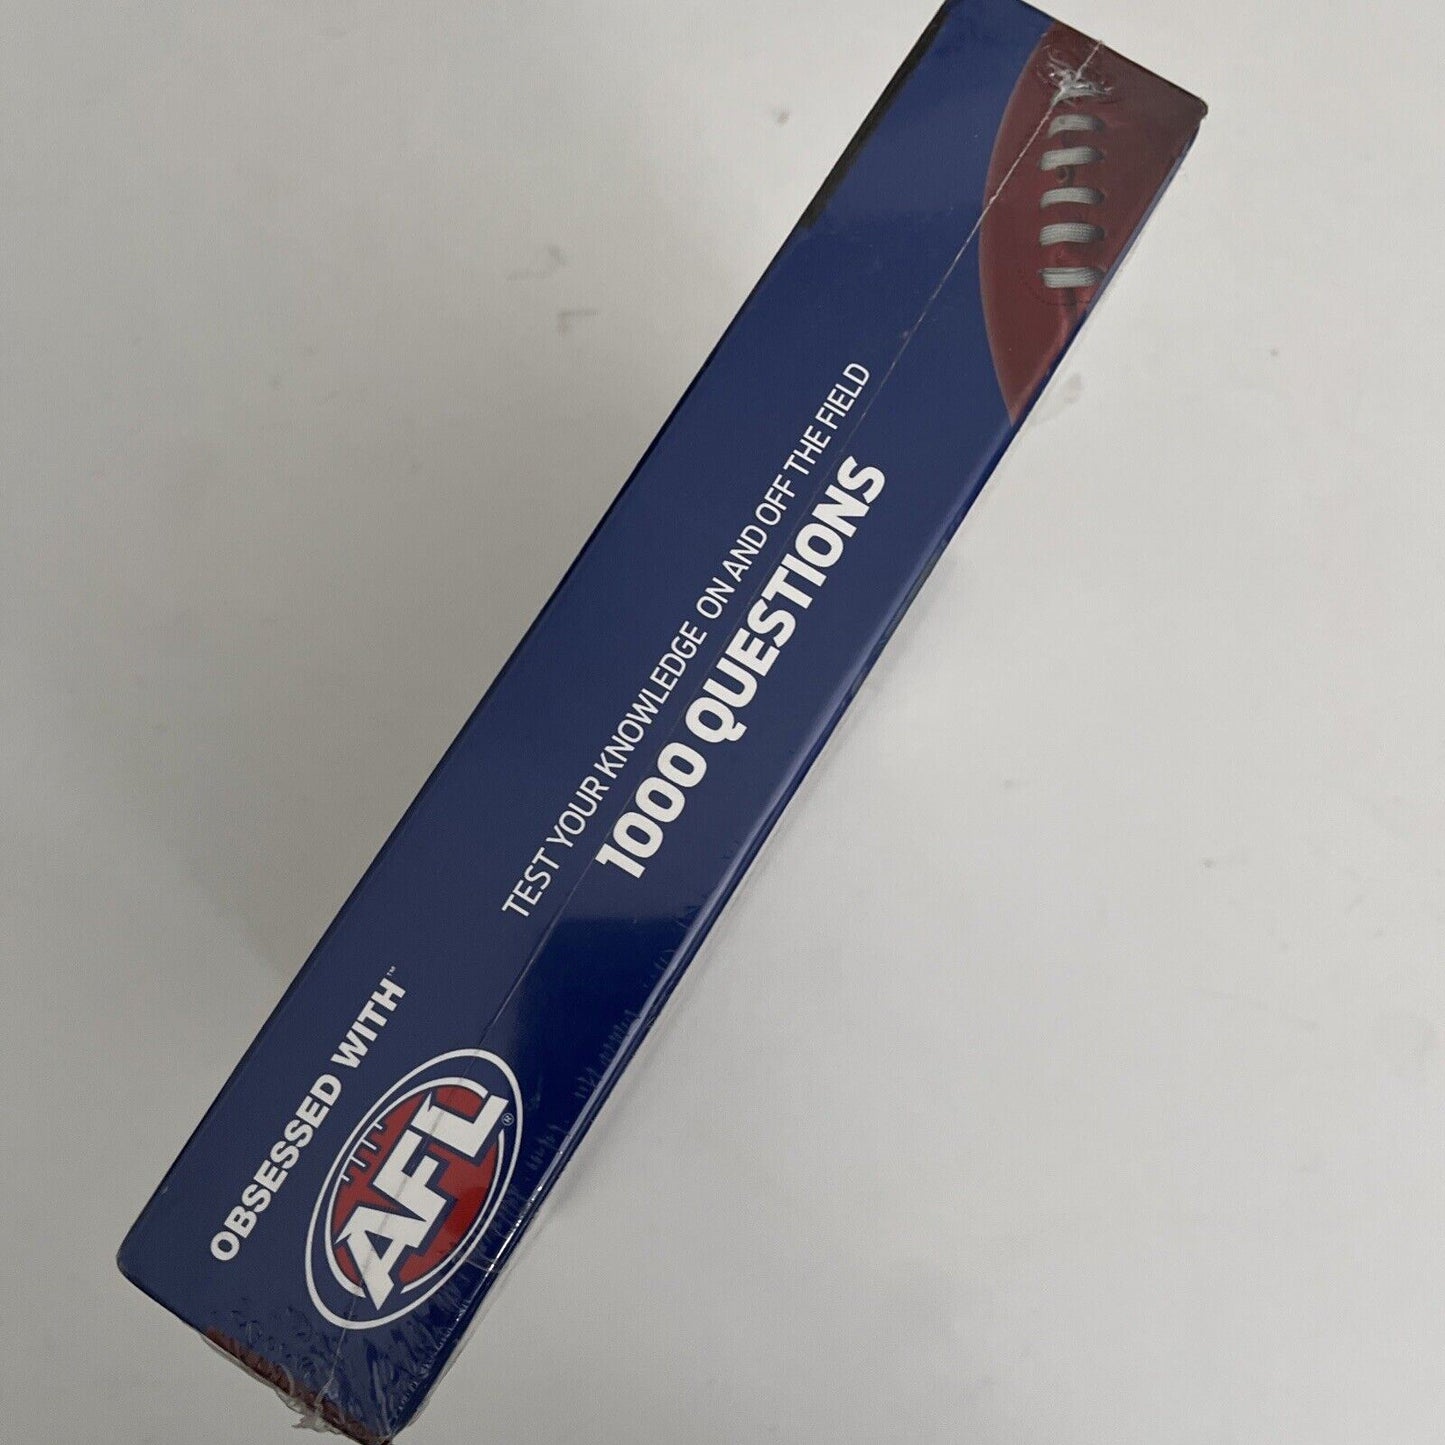 *New Sealed* Obsessed With AFL Board Game Aussie Football - Test Your Knowledge